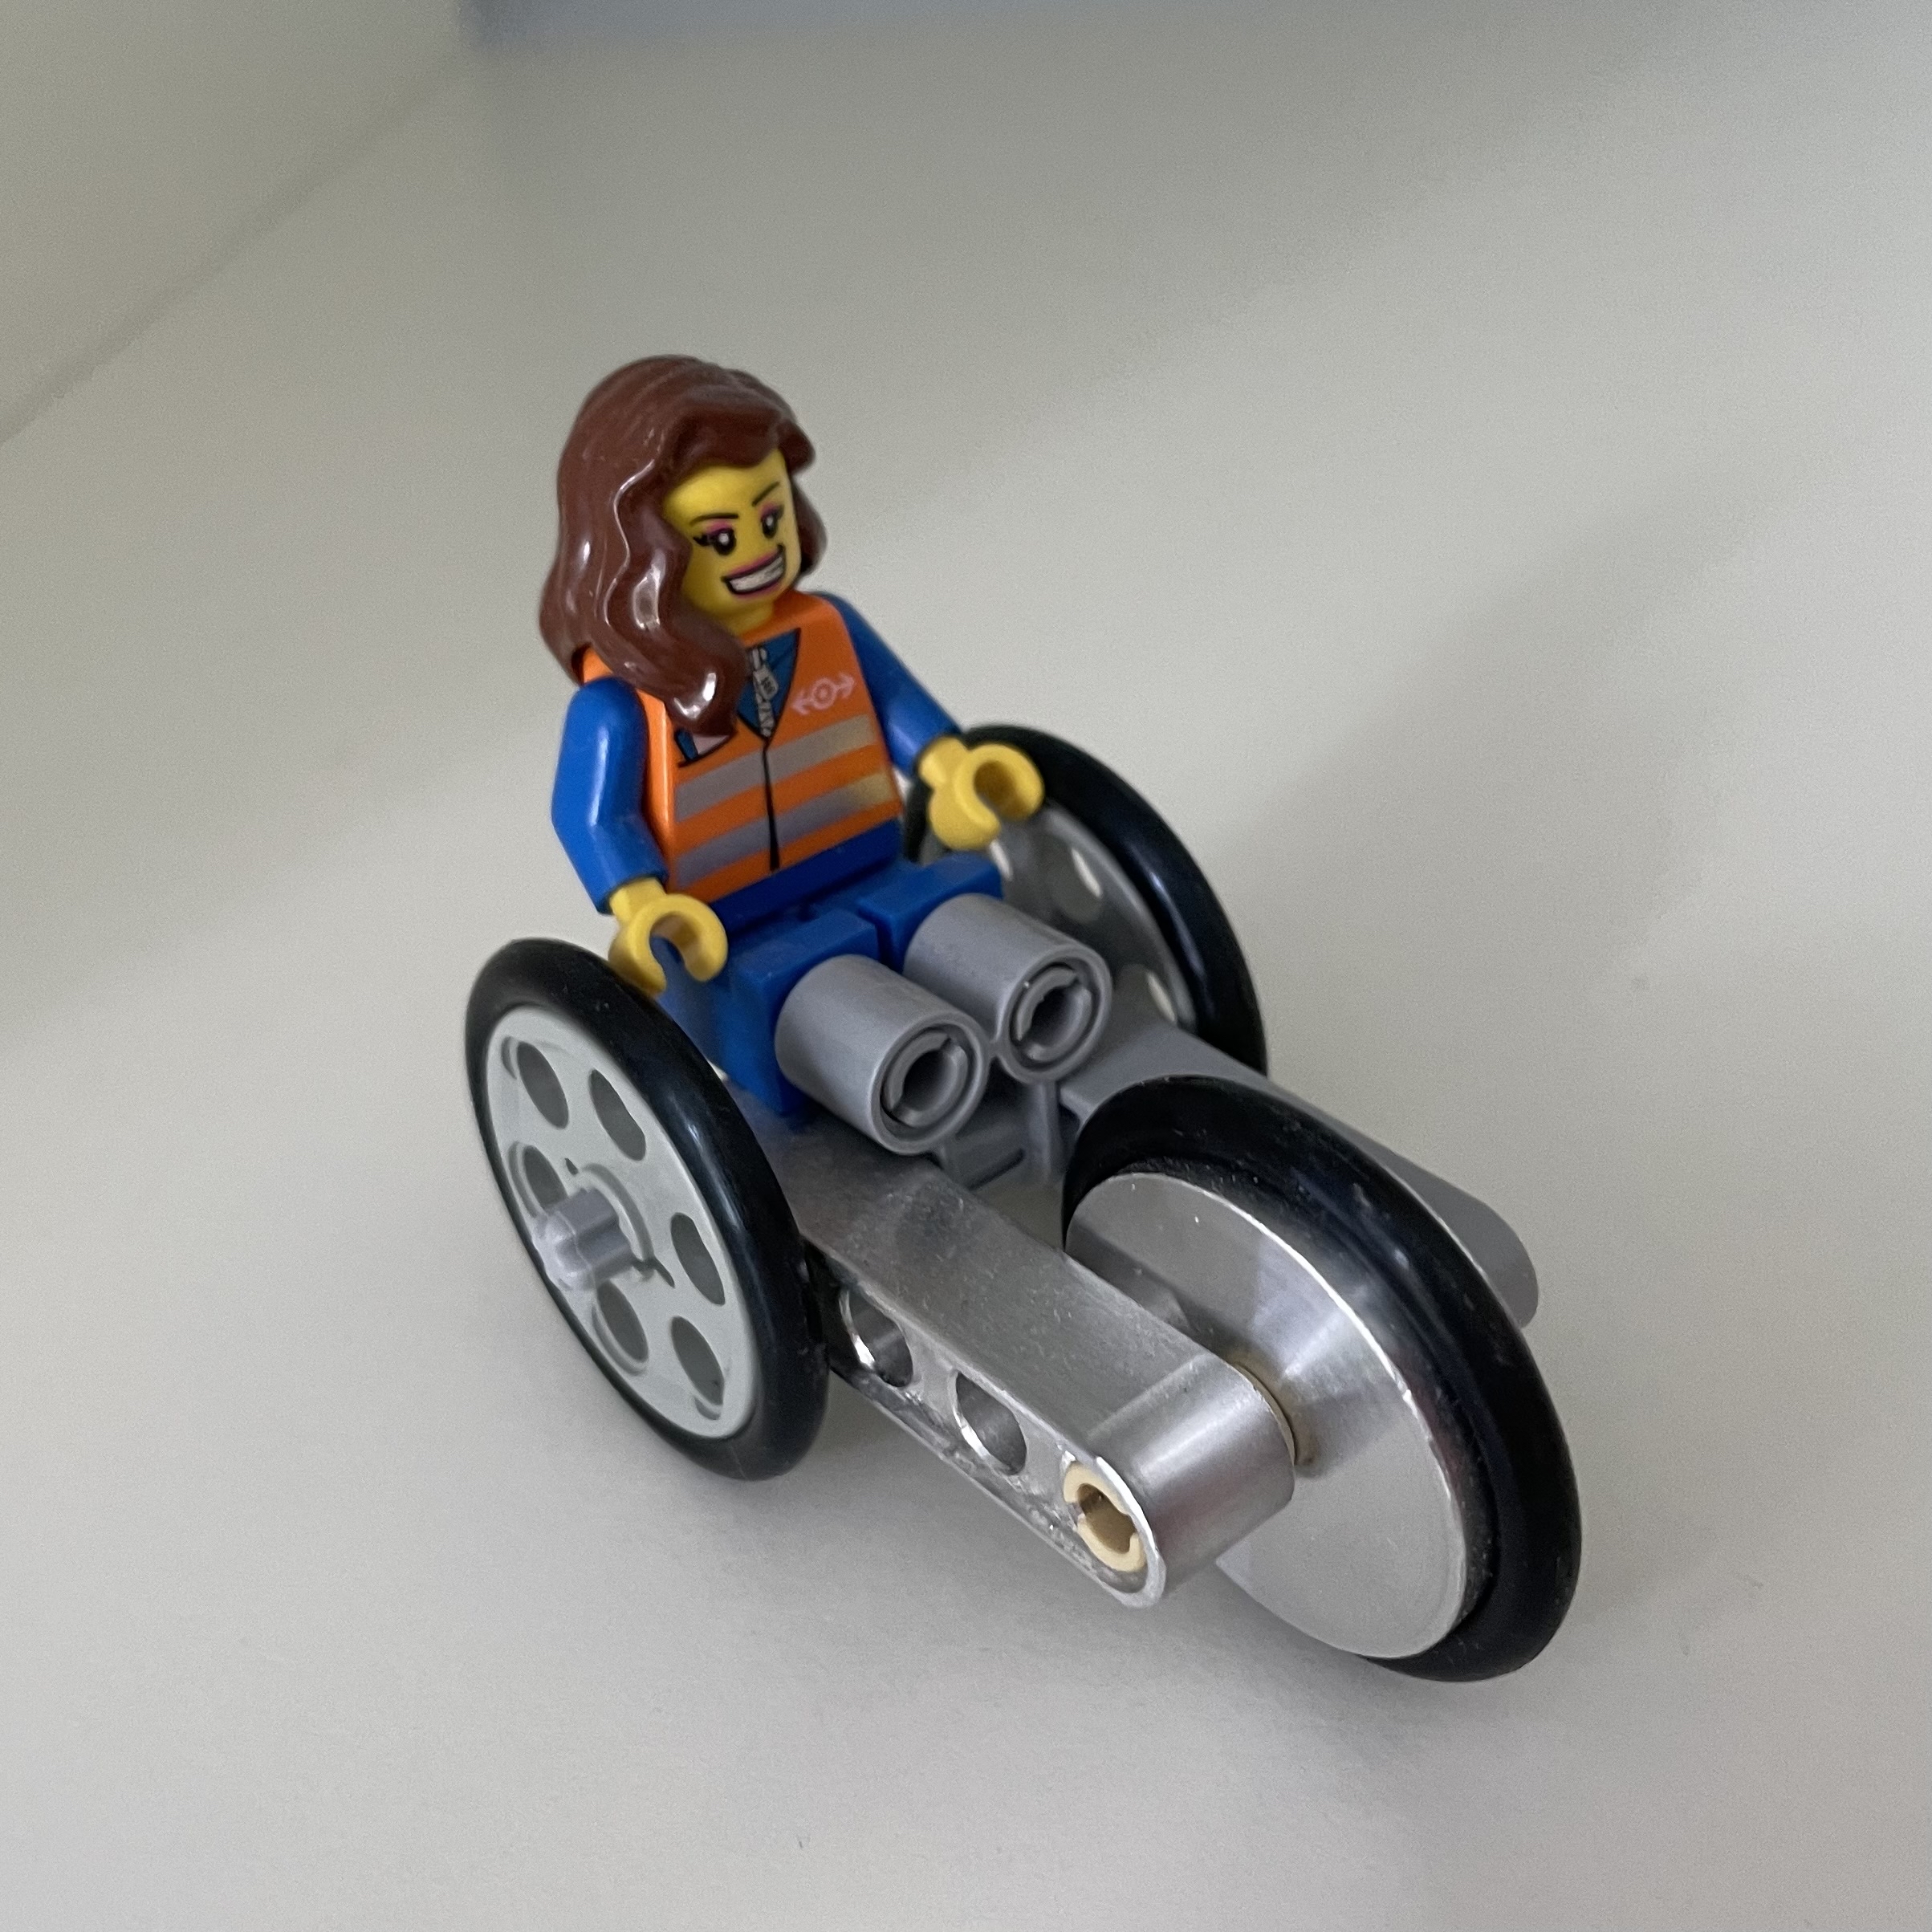 Annie's Lego tricycle